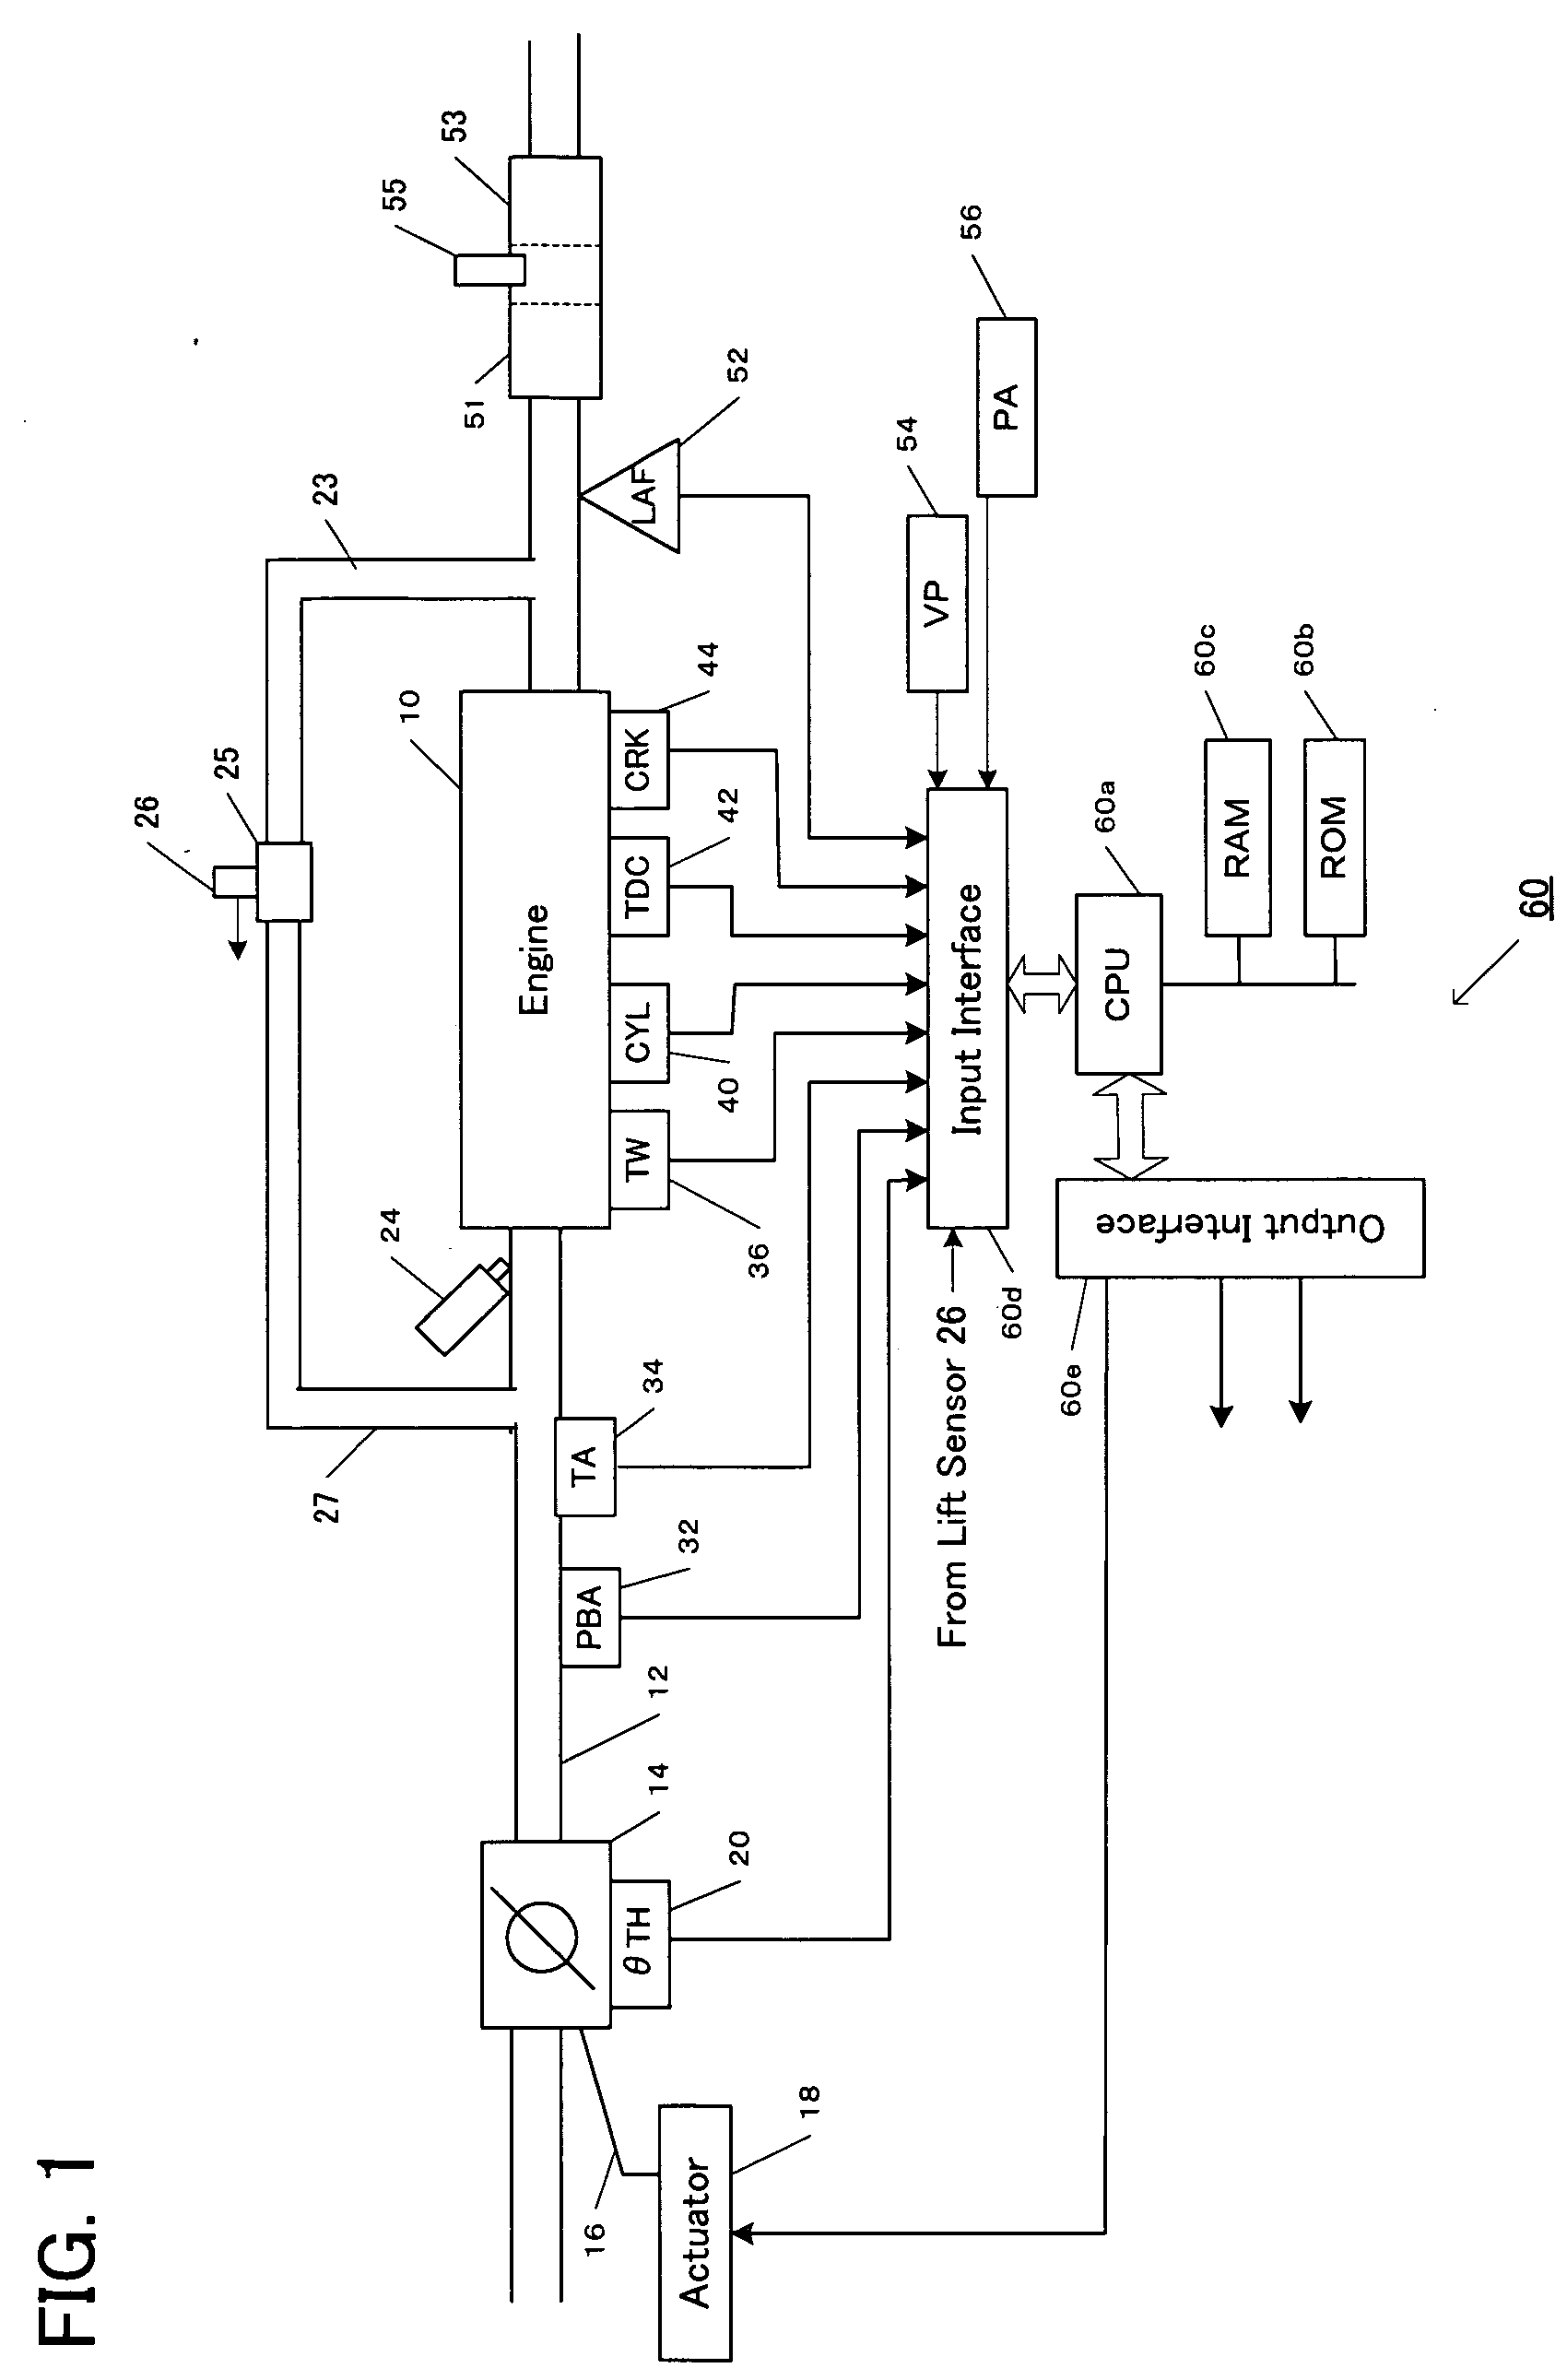 Leakage detecting apparatus for an exhaust gas re-circulating system of an engine